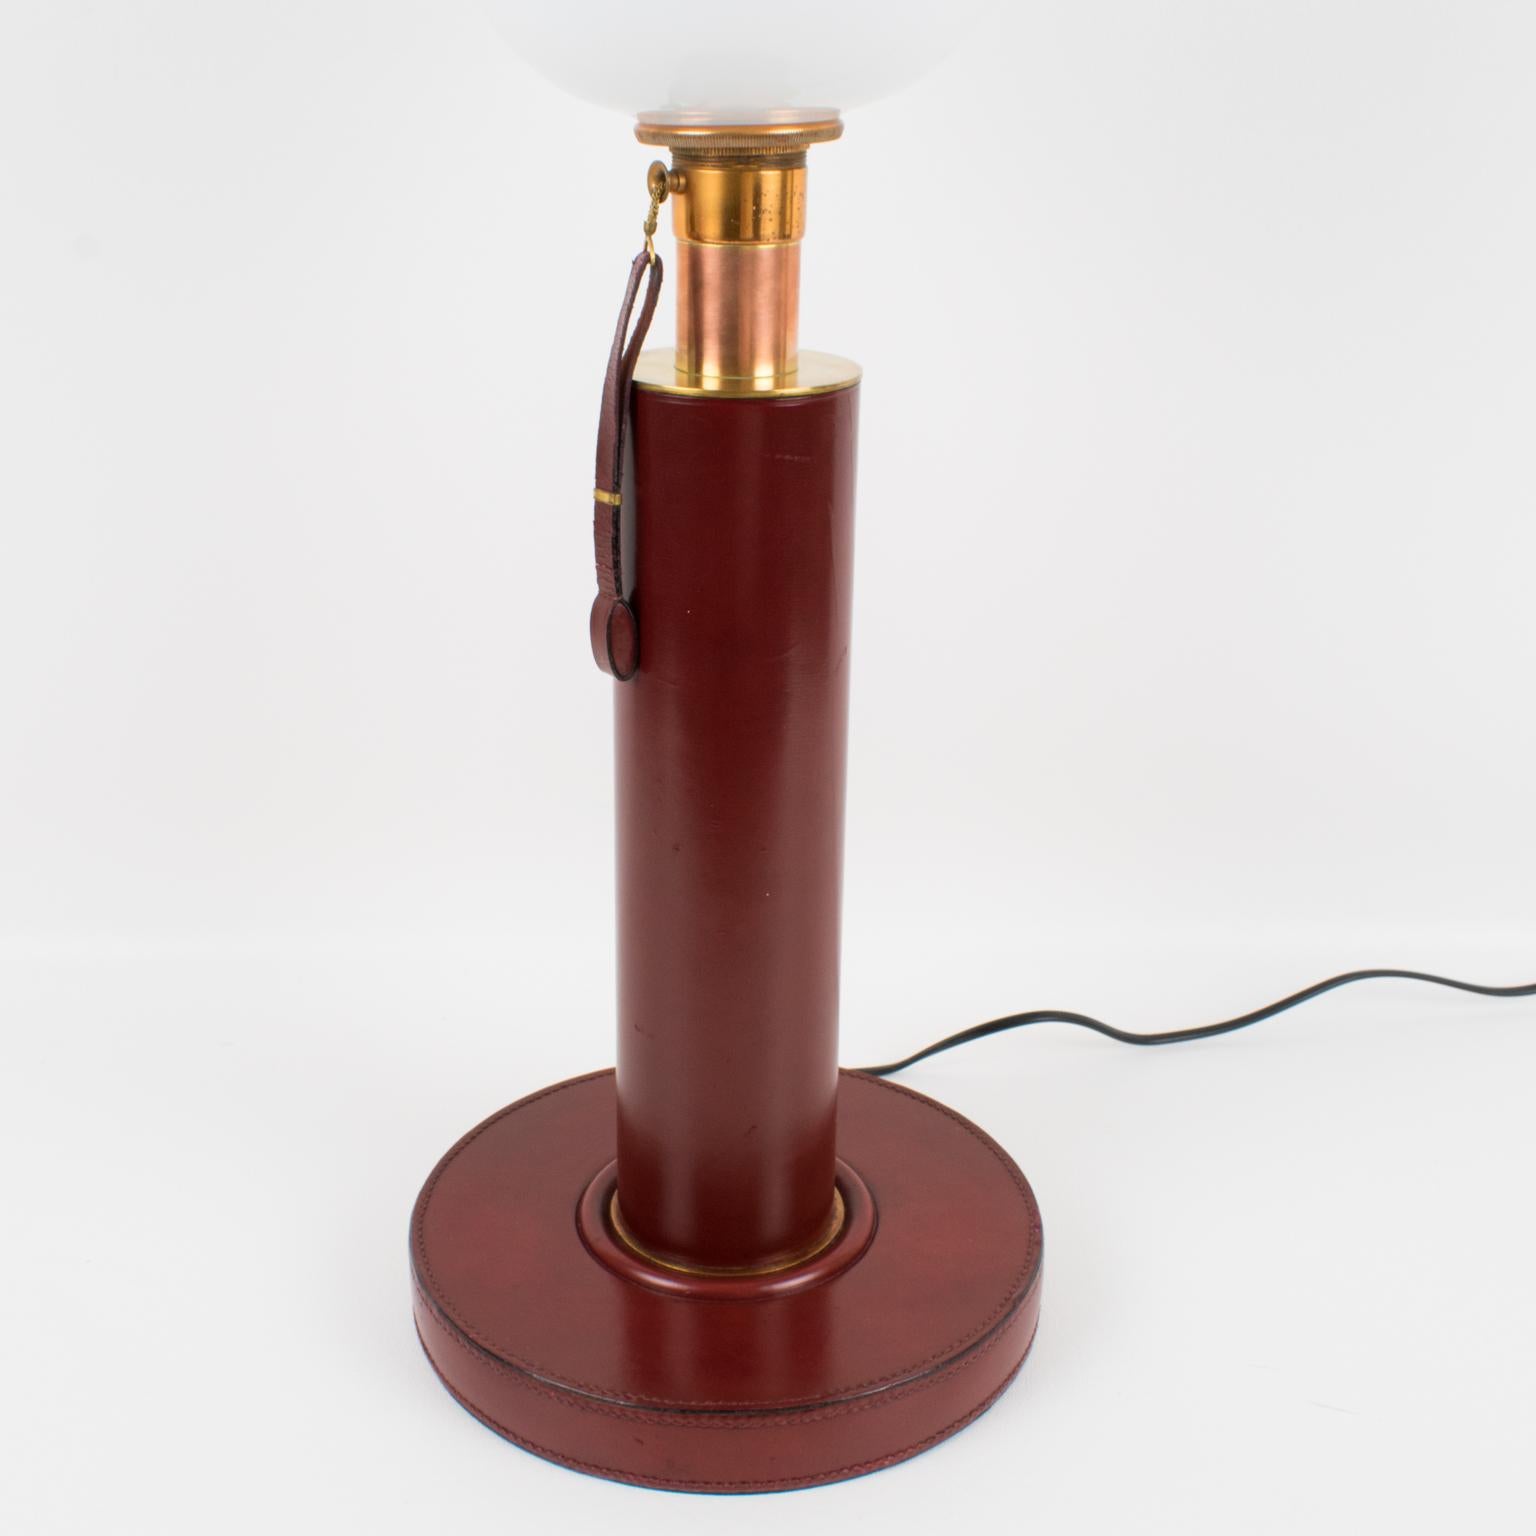 Paul Dupre Lafon 1950s French Art Deco Hand-Stitched Red Leather Table Lamp 1